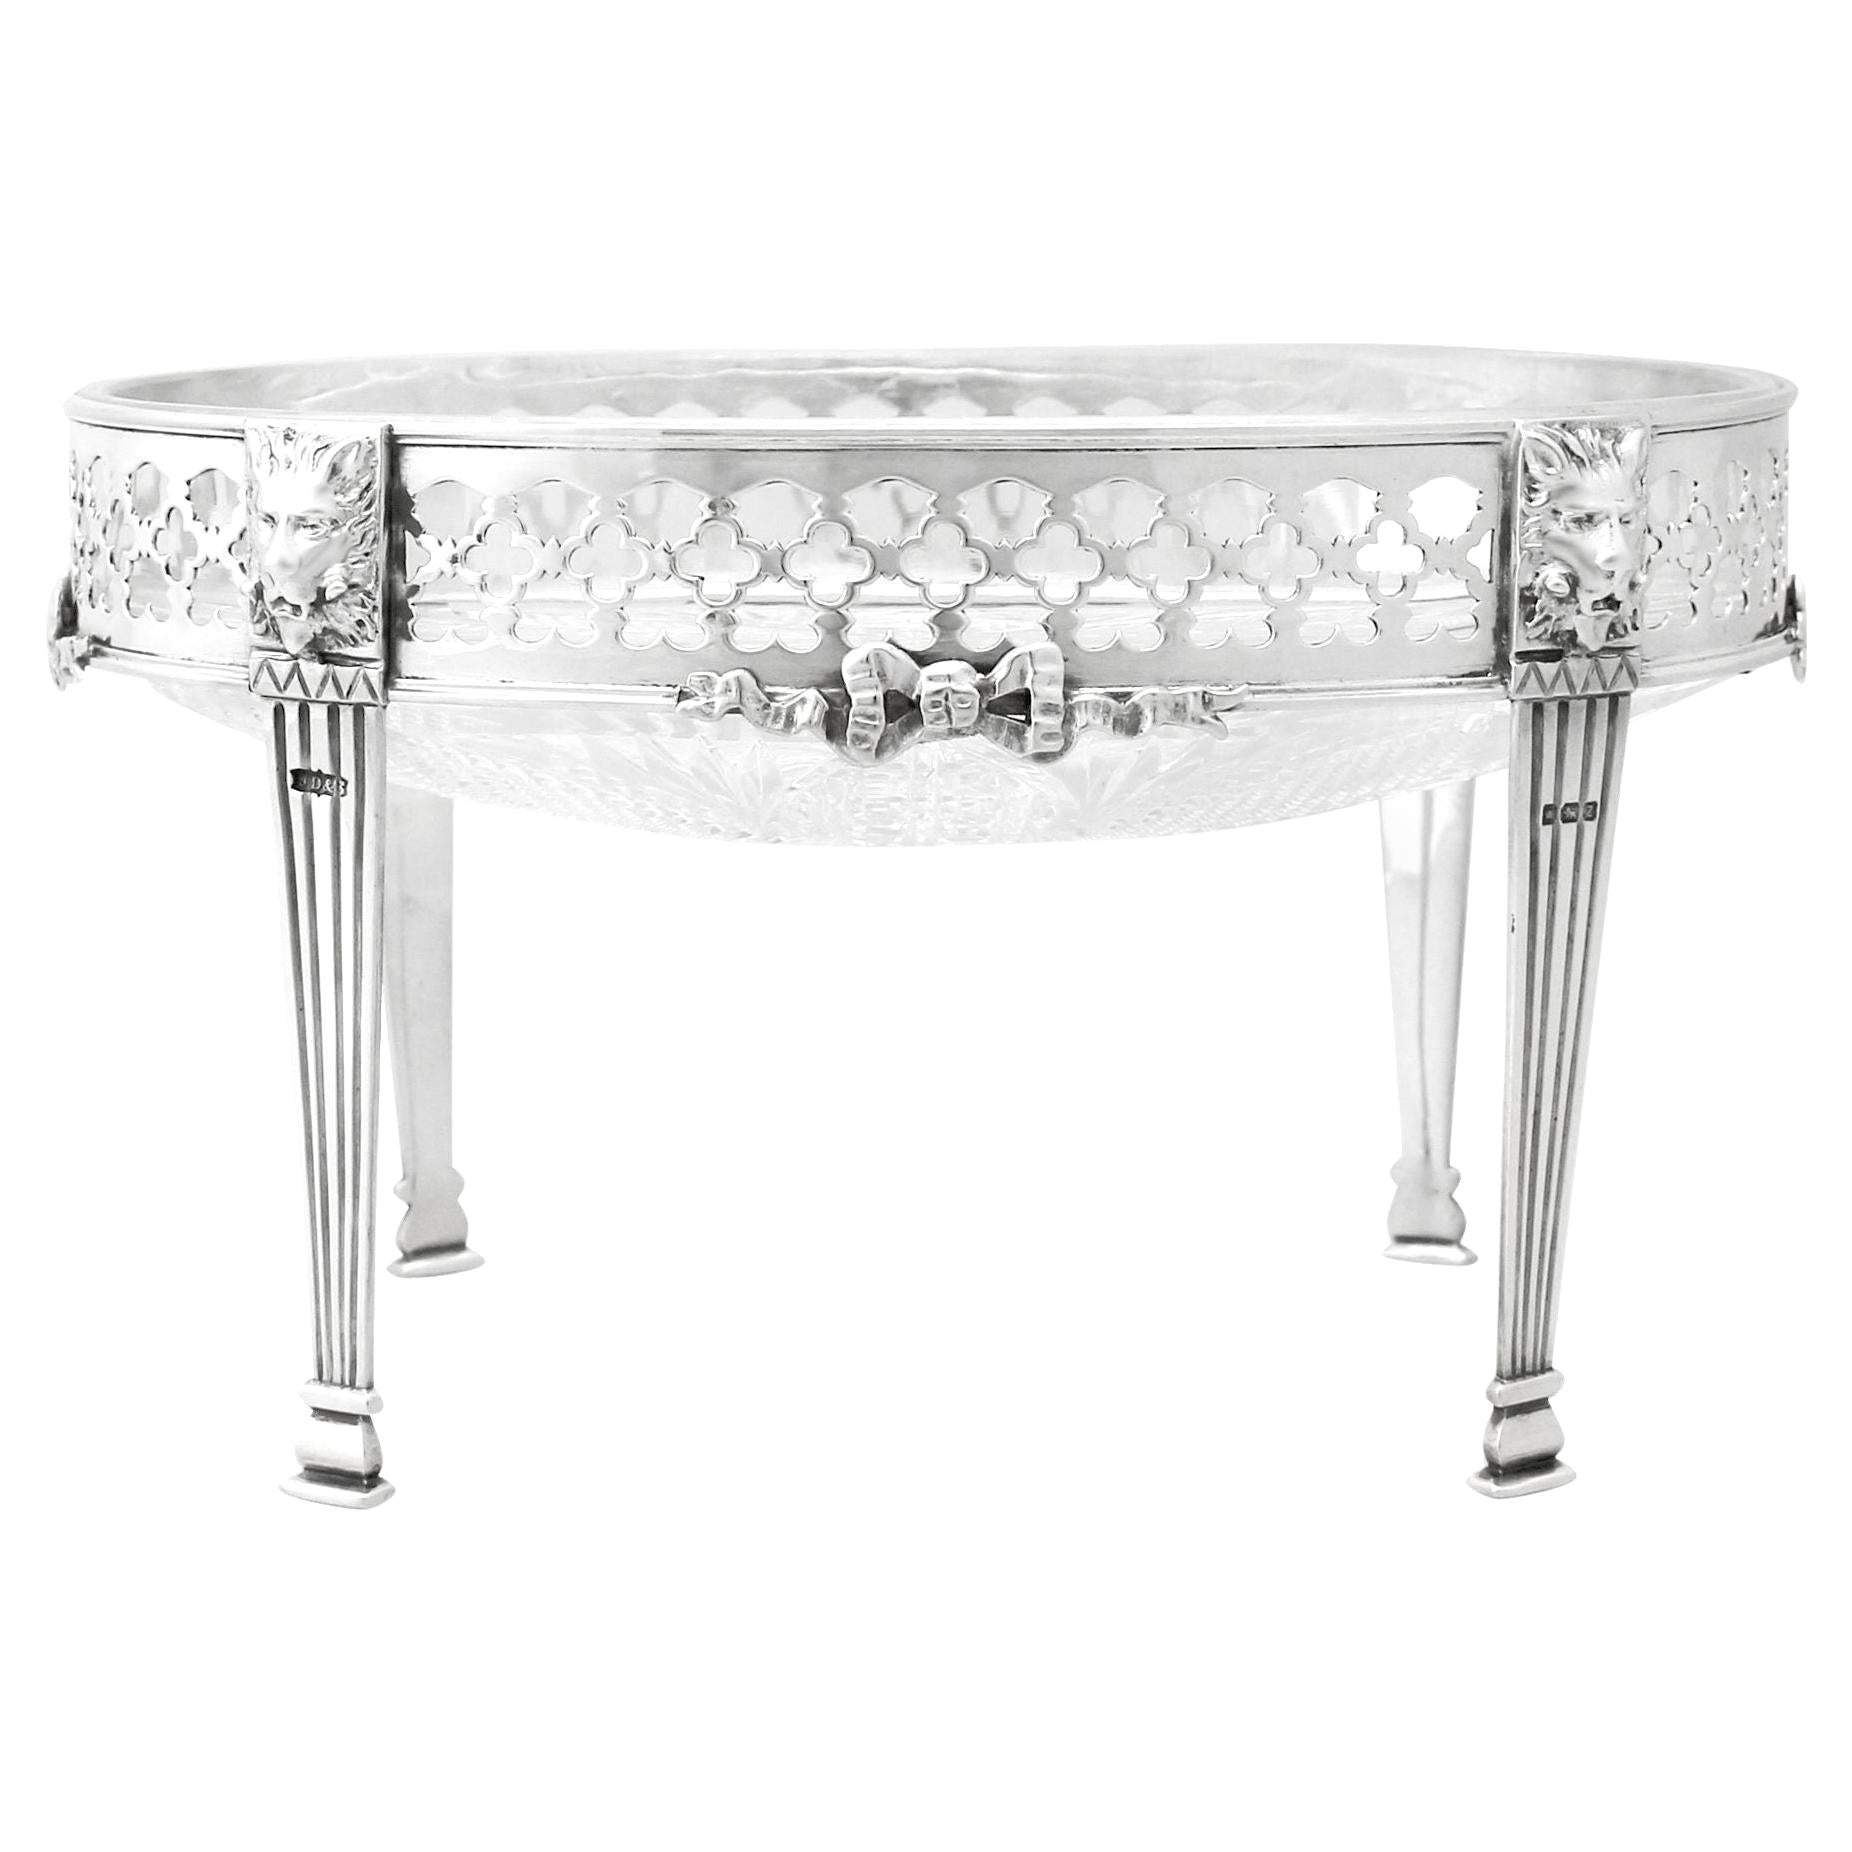 Antique Victorian Sterling Silver and Cut-Glass Centerpiece For Sale